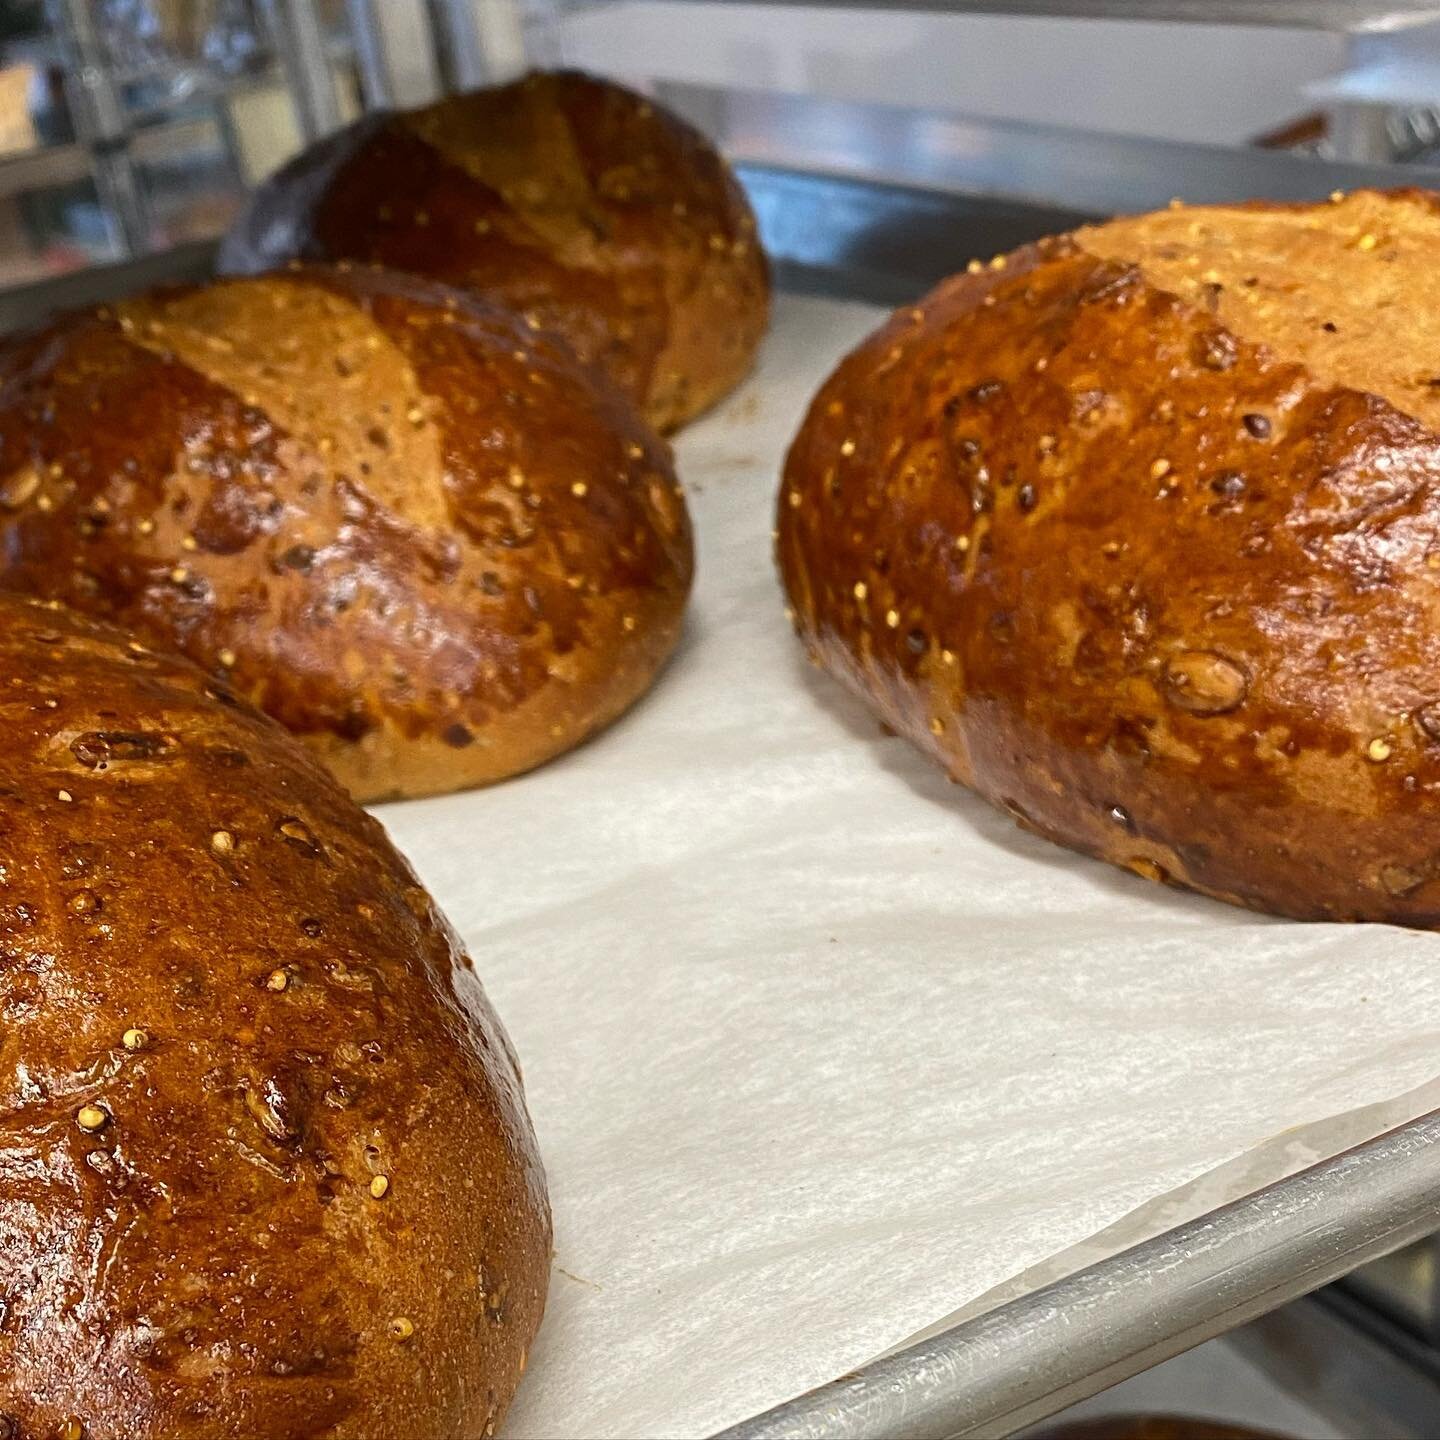 St Croix Seed Bread available today while supplies last. Going fast!!! Stop by for a loaf, which is perfect for sandwiches, dipping in a soup or on its own! #bread #seeds #sunflower #pepitas #flaxseed #millet #honey #bakery #hudsonriver #wisconsin